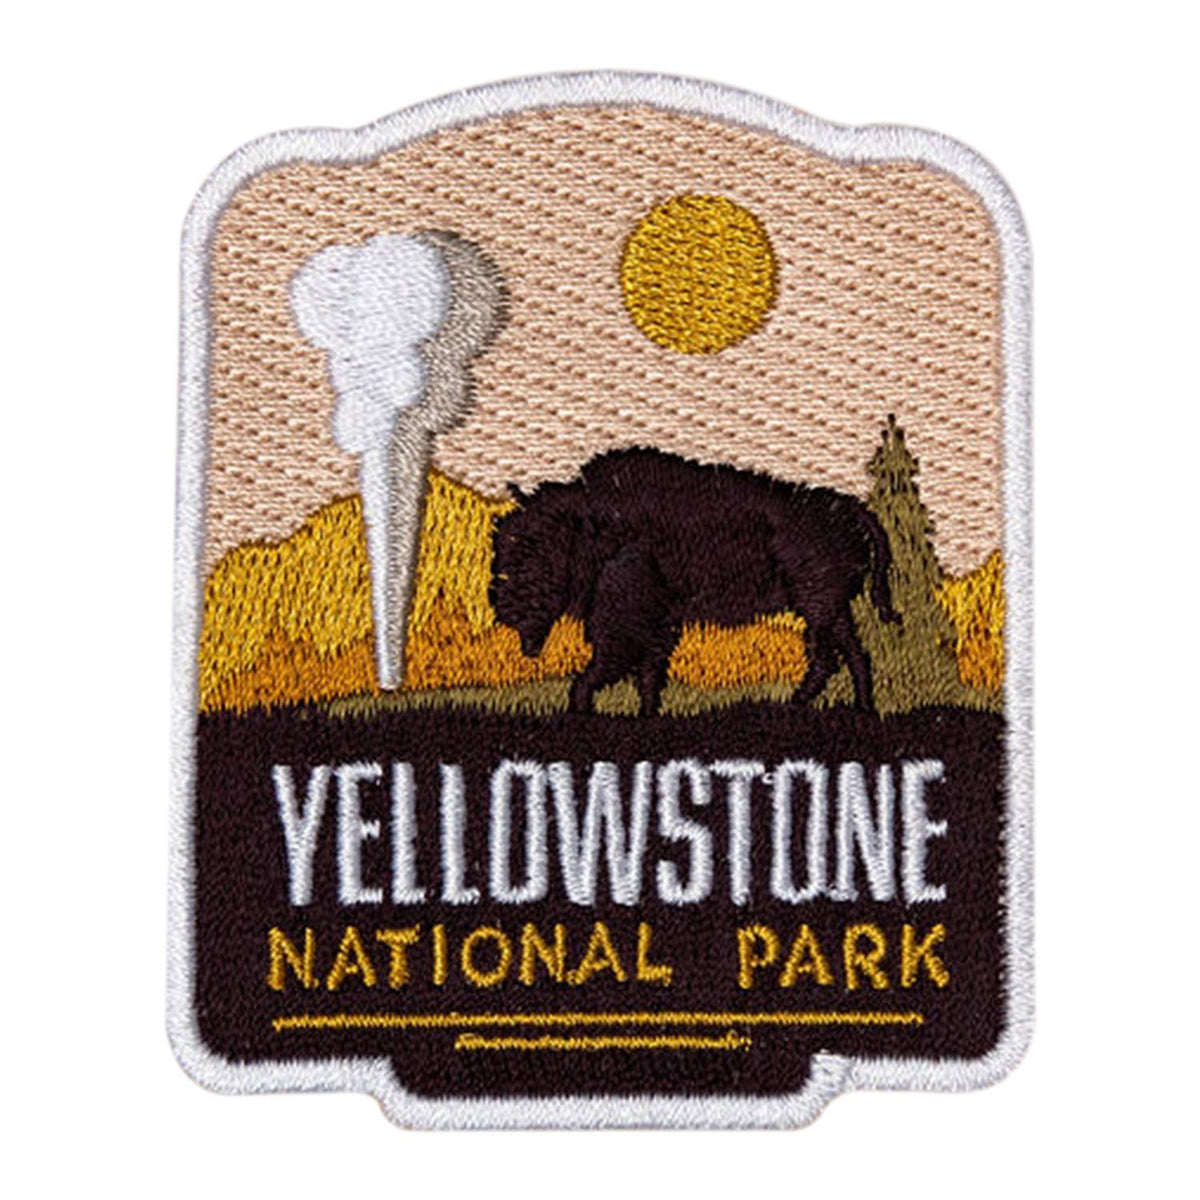 Yellowstone National Park Iron-on Patch